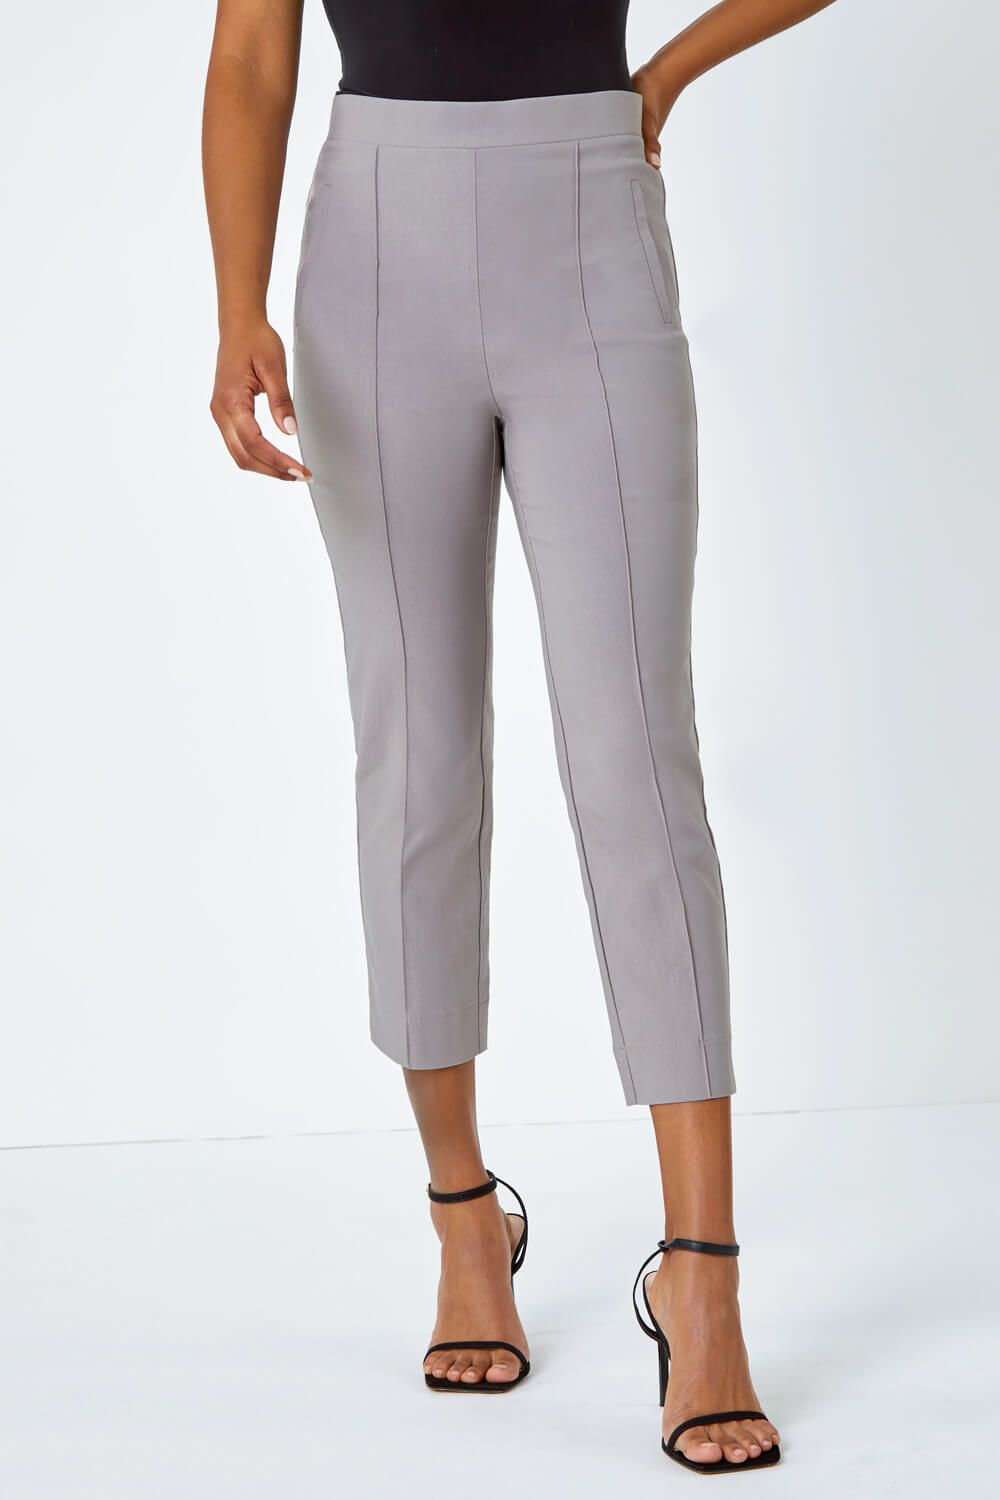 Taupe Seam Detail Stretch Cropped Trousers, Image 4 of 5